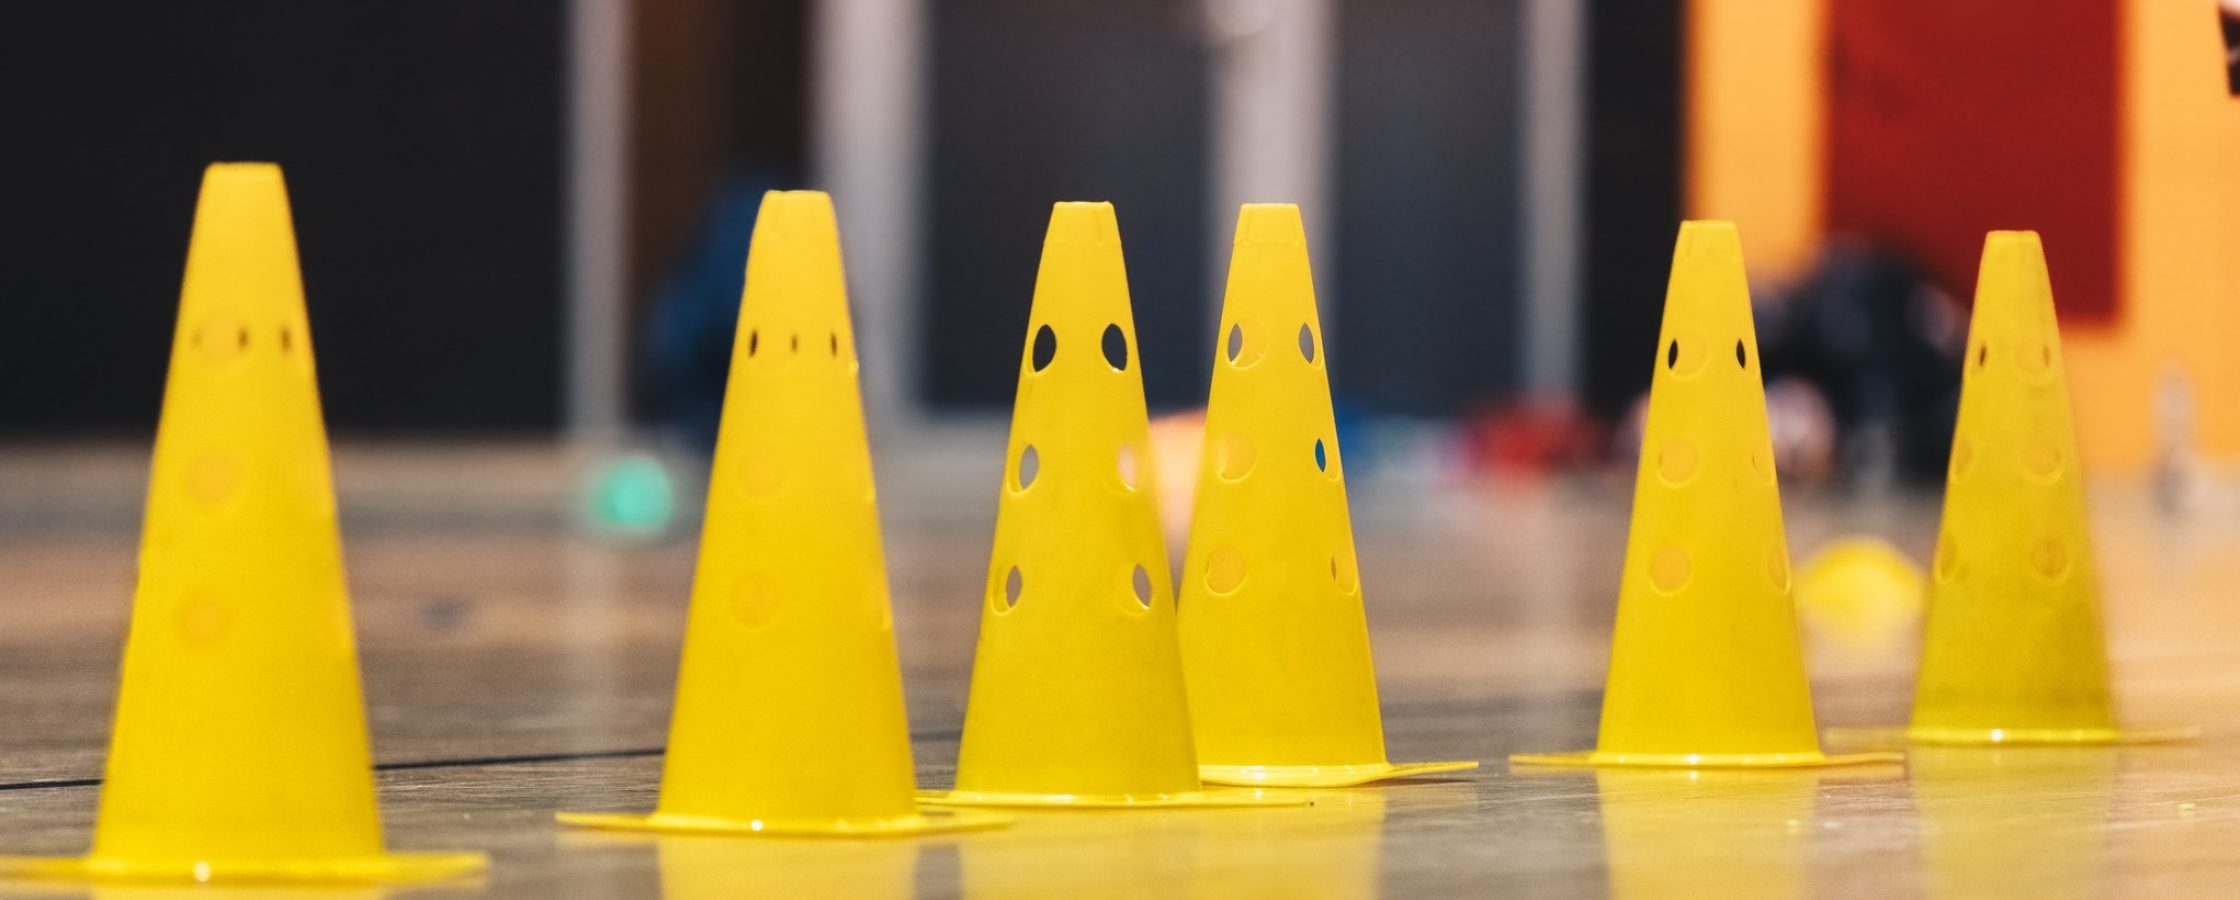 Marker cones on basketball court